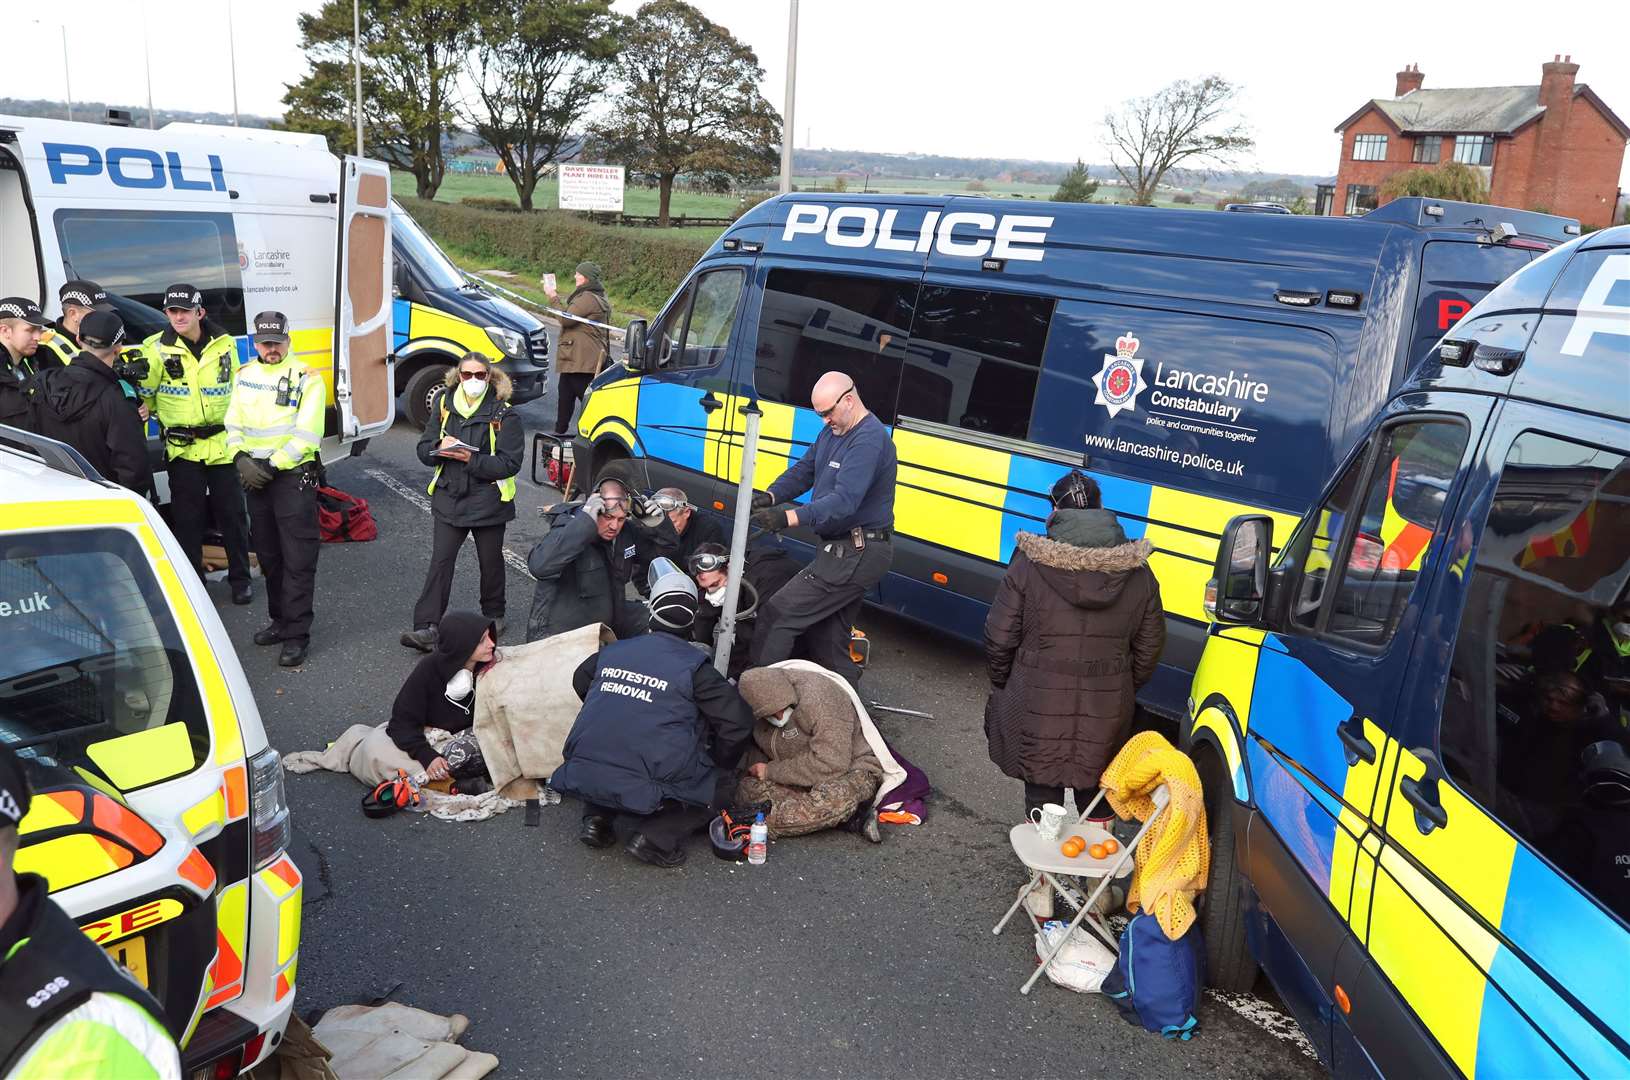 A police team cuts a man and woman out of a set of tyres, which they had apparently cemented their arms into, outside energy firm Cuadrilla’s site in Preston New Road (PA)